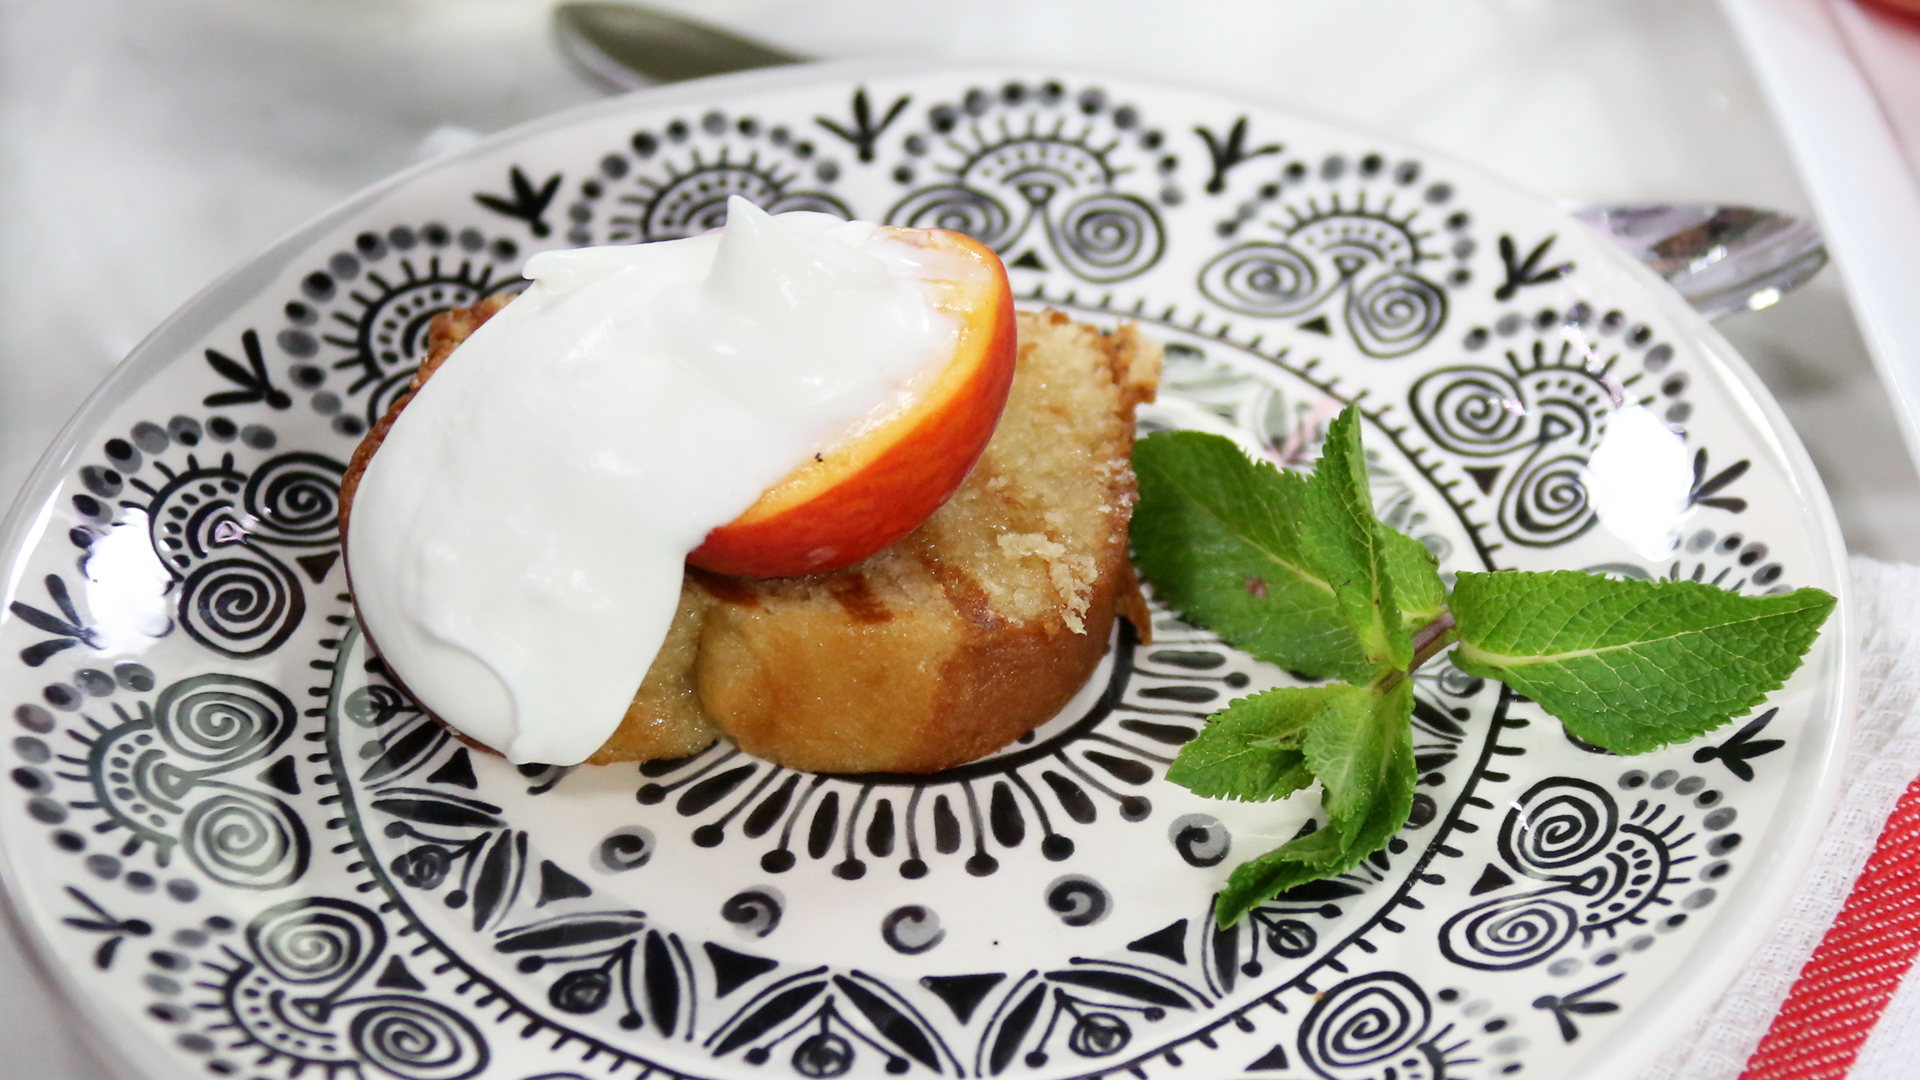 Grilled pound cake and peaches with rosemary syrup